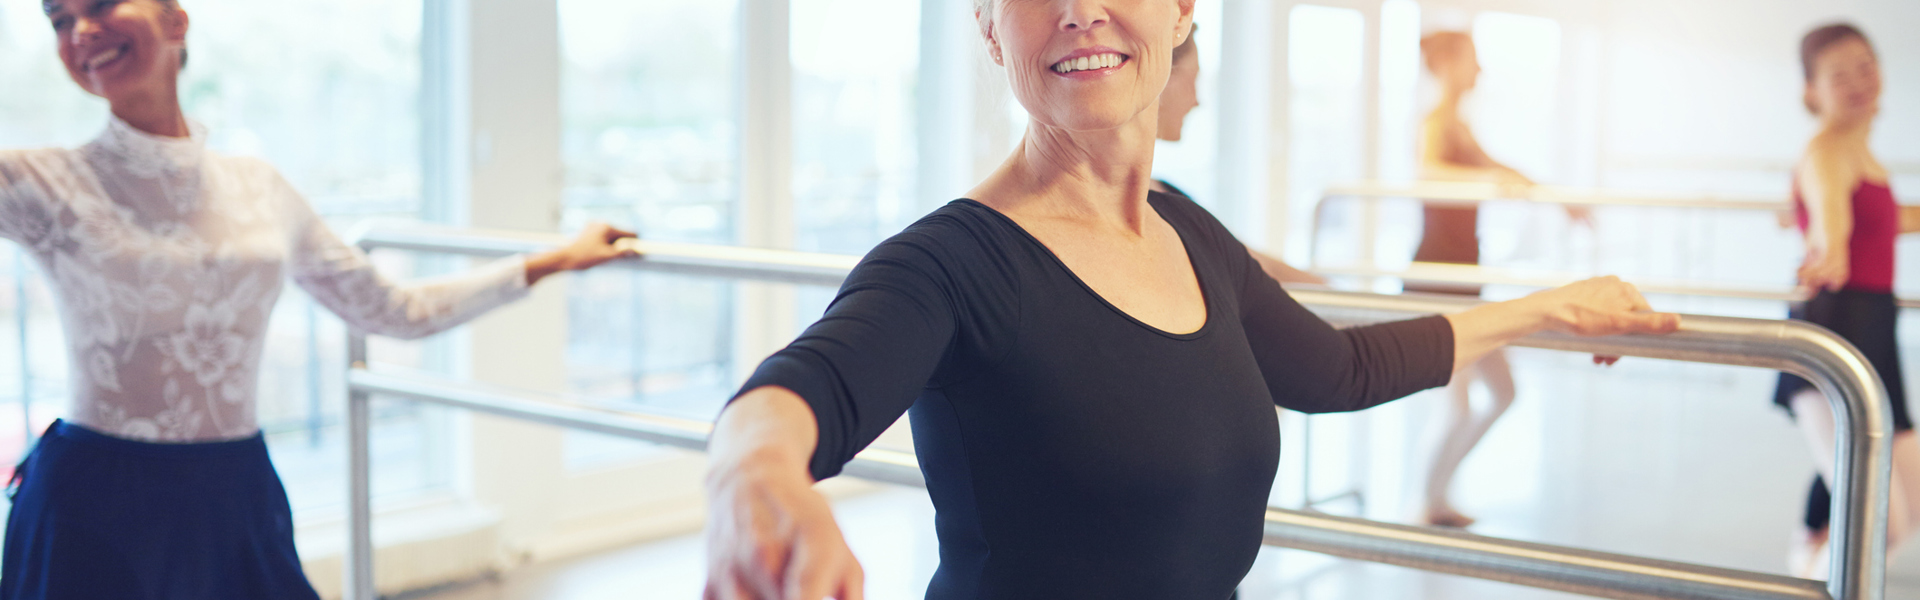 a woman in a black top at a barre taking part in a ballet class